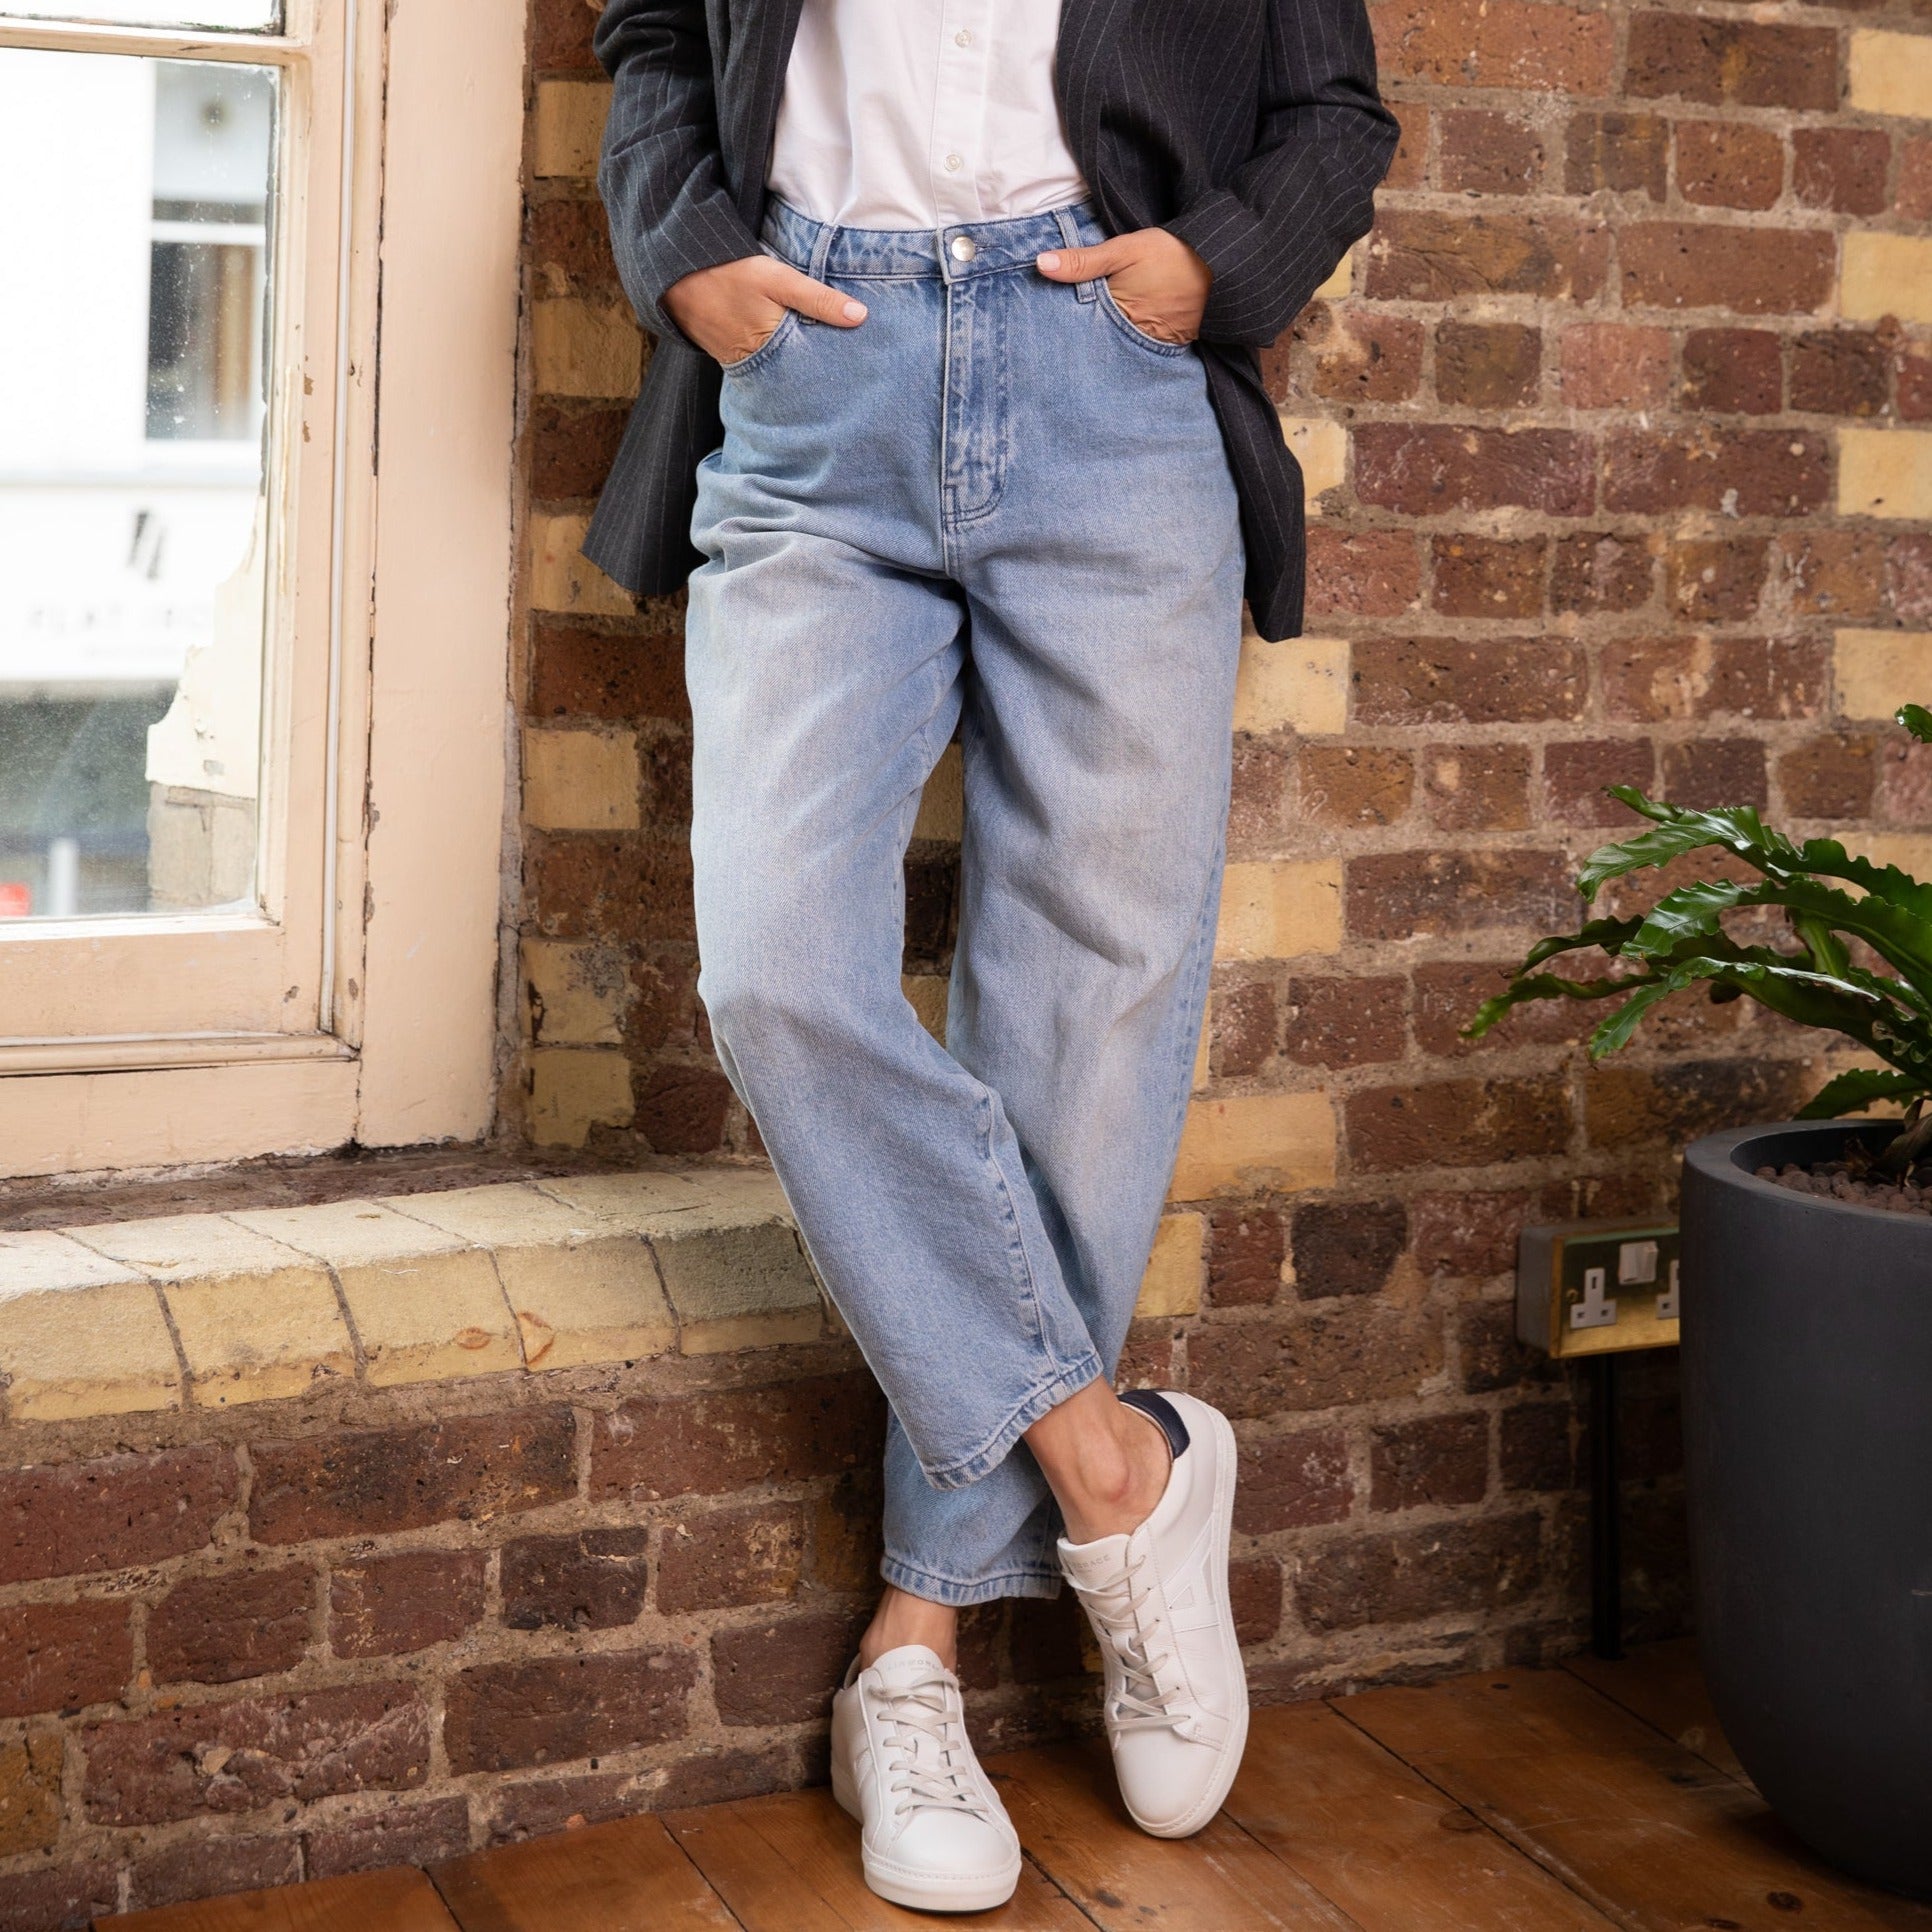 relaxed ankle jeans eleven loves Eleven loves elevenloves 11 loves ellenloves sustainable thea barrel leg jeans relaxed jean pale wash mid rise jean mum jean